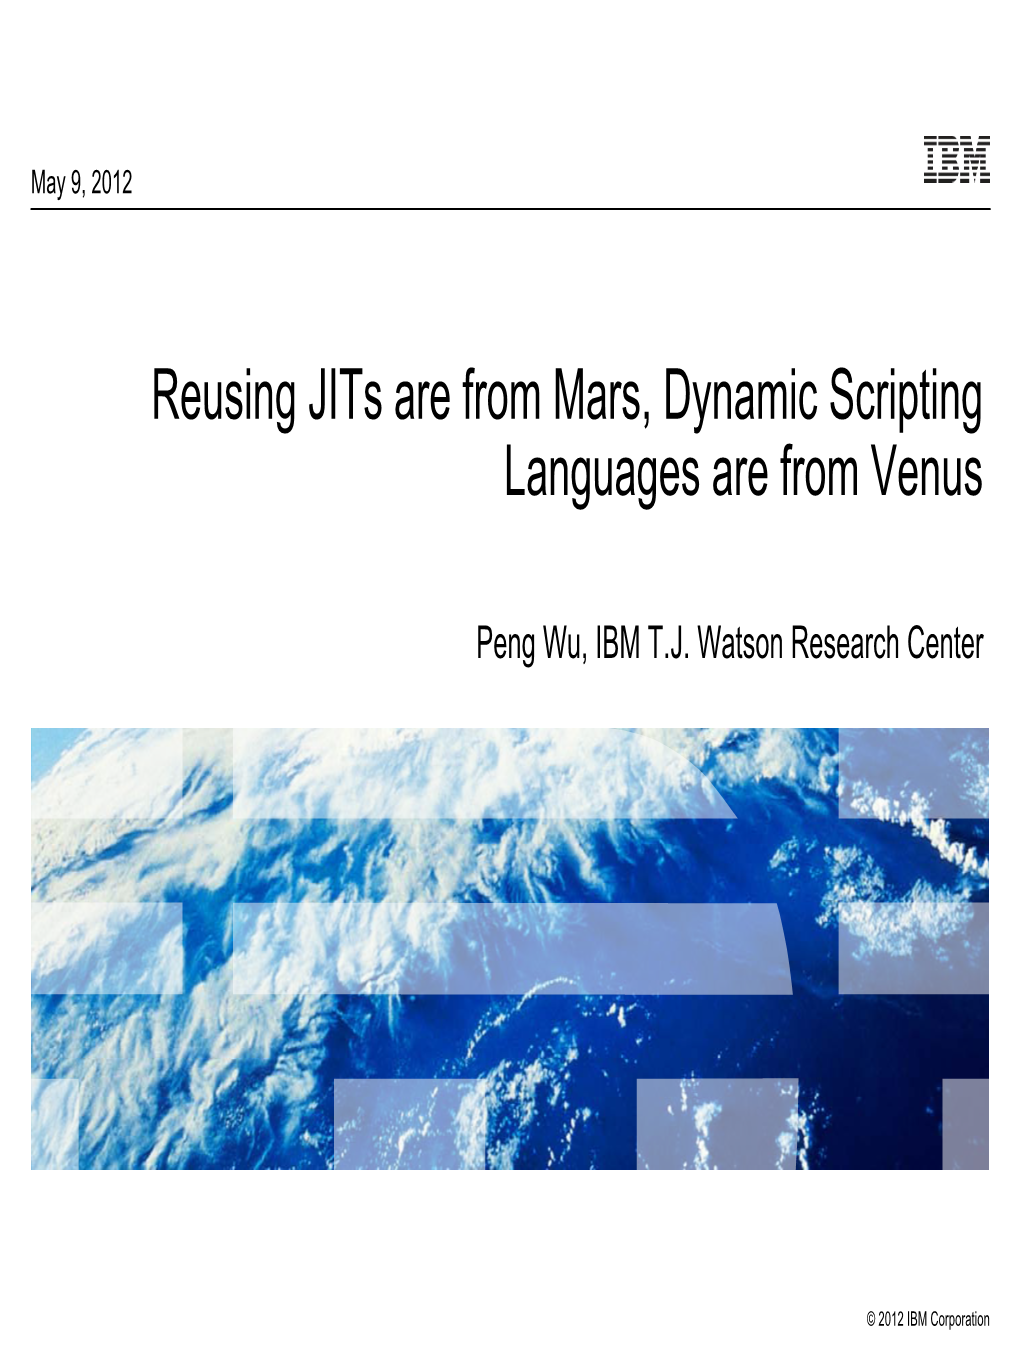 Reusing Jits Are from Mars, Dynamic Scripting Languages Are from Venus